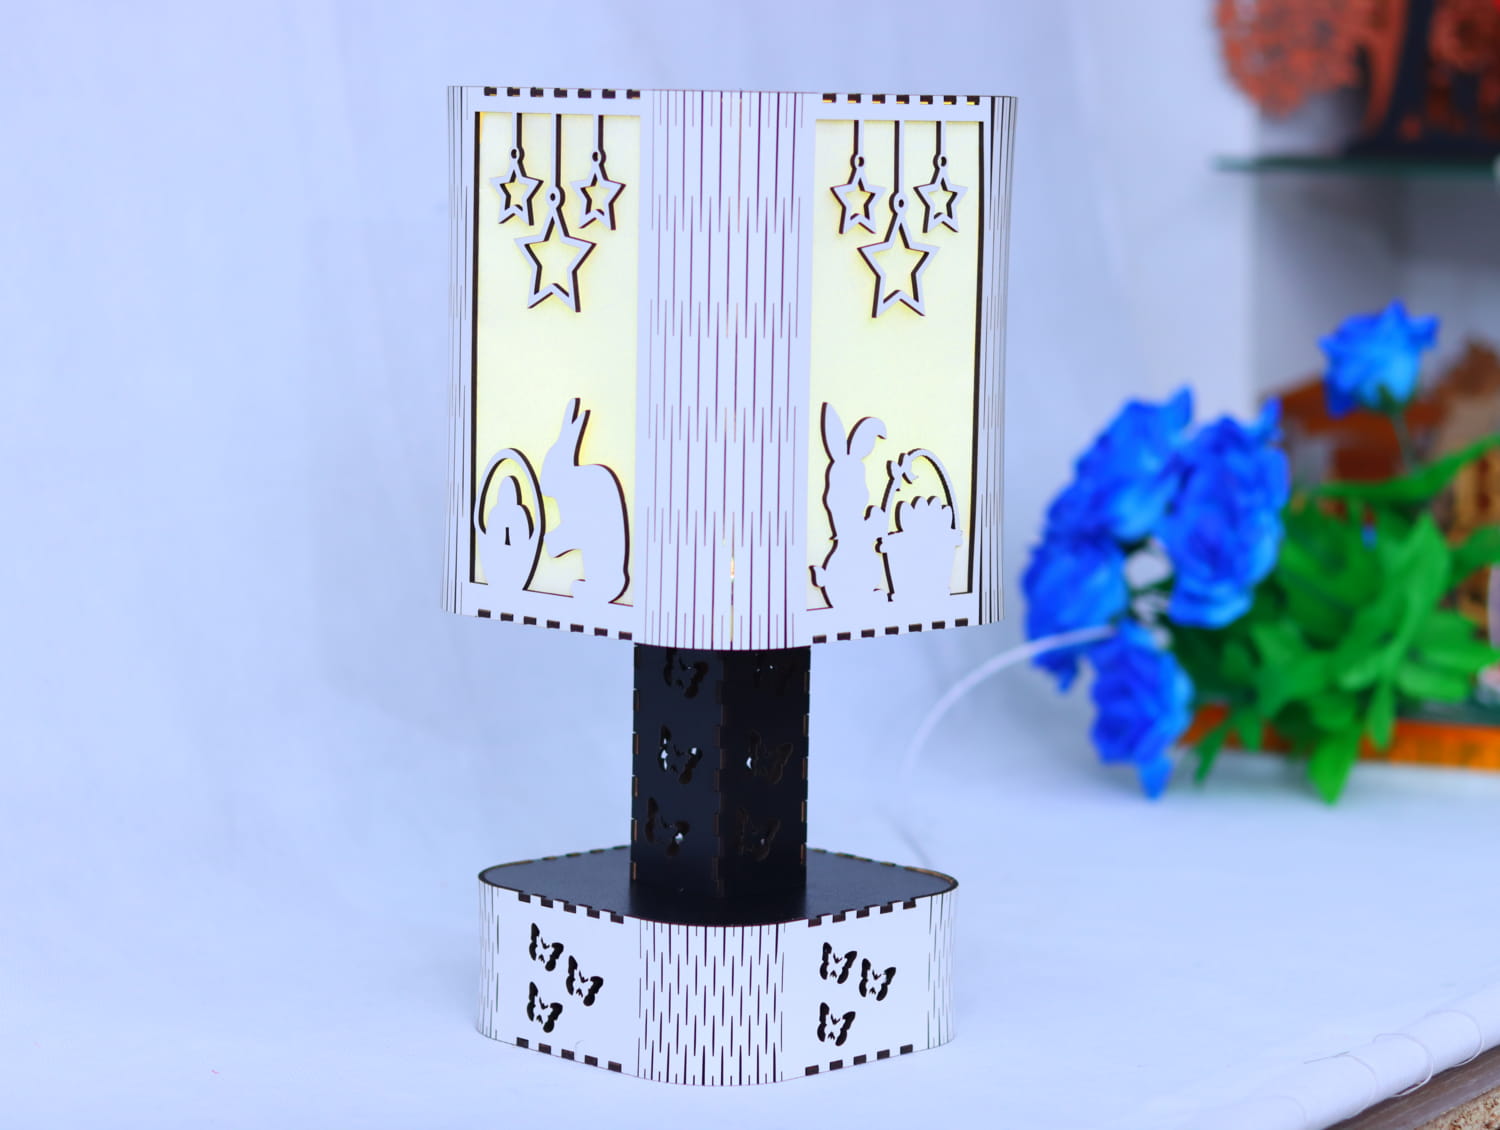 Laser Cut Easter Decorative Table Lamp Free Vector